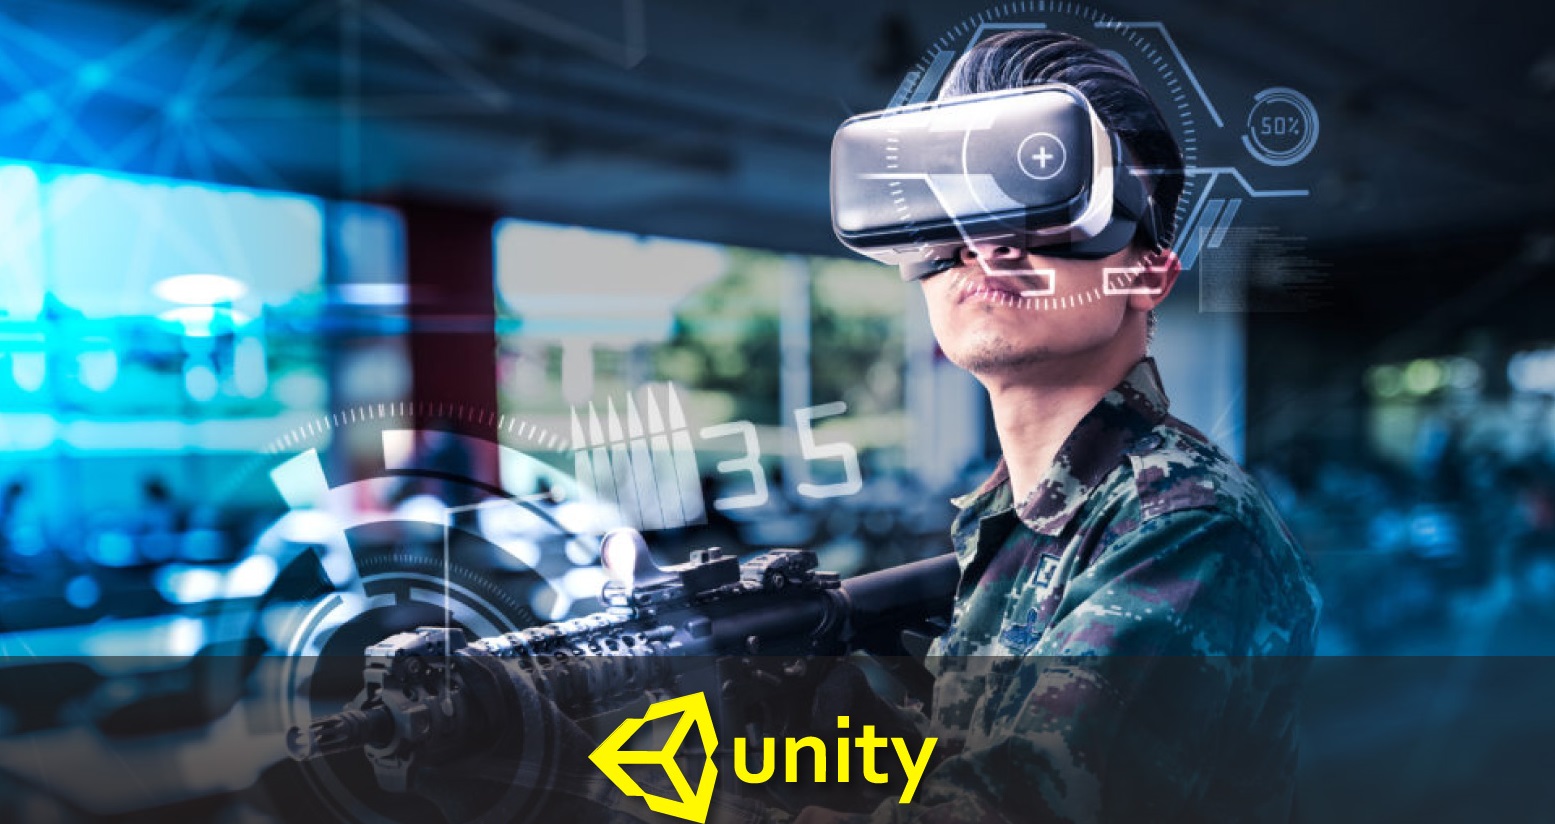 Can Unity make VR games